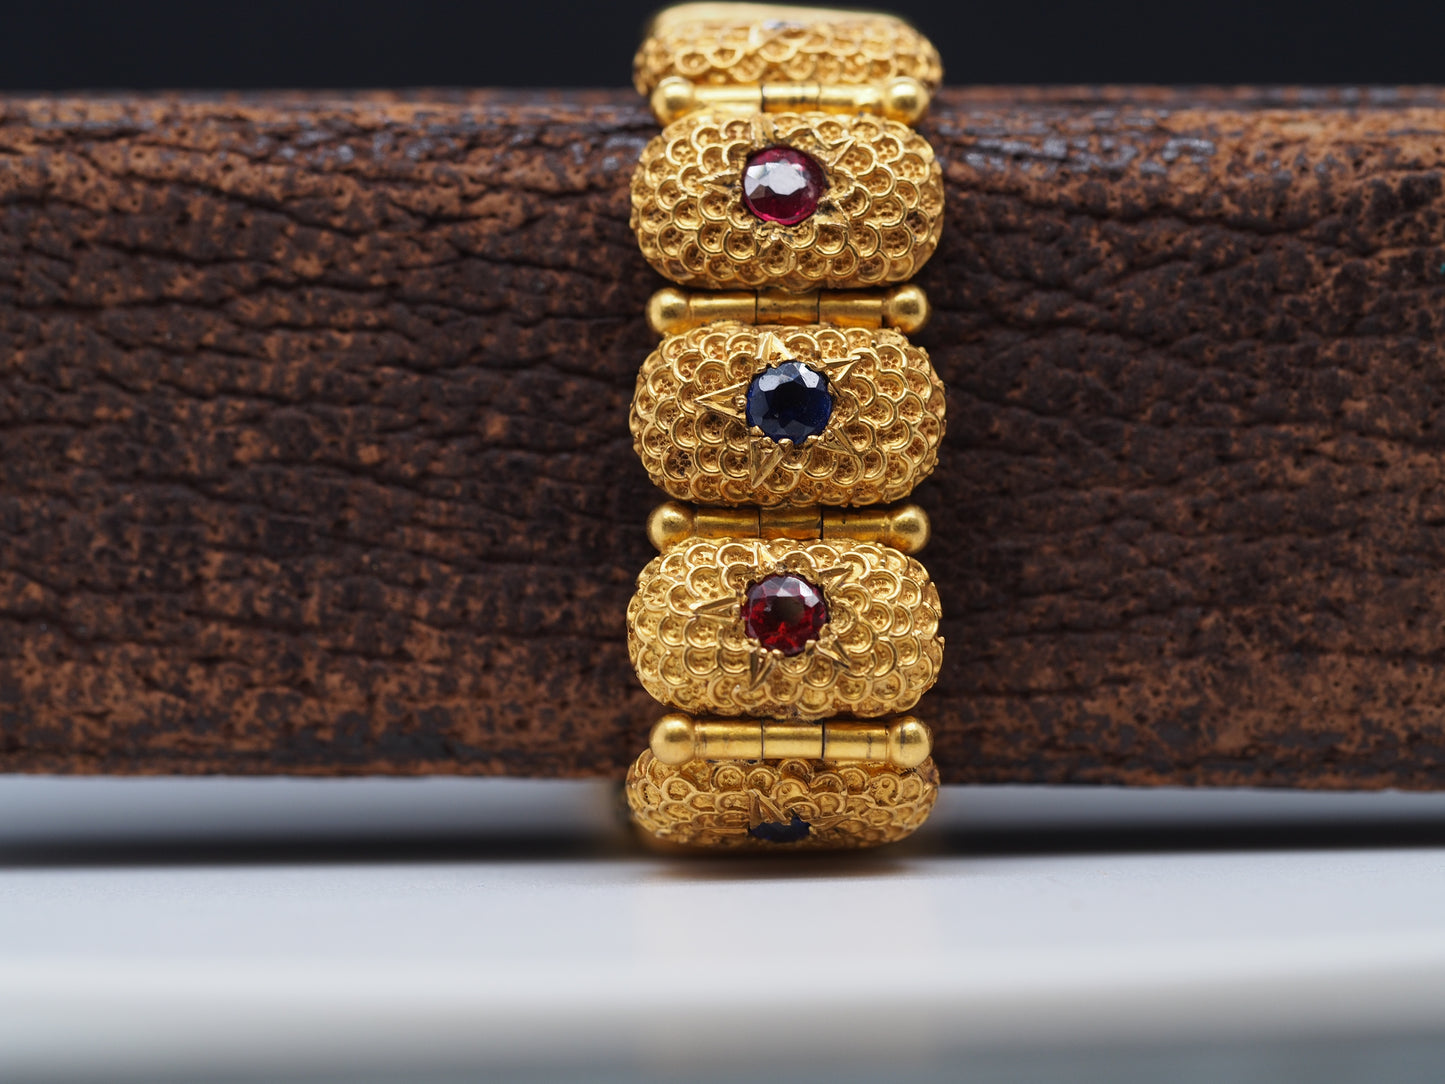 14K Yellow Gold Victorian Bracelet with Color Stones